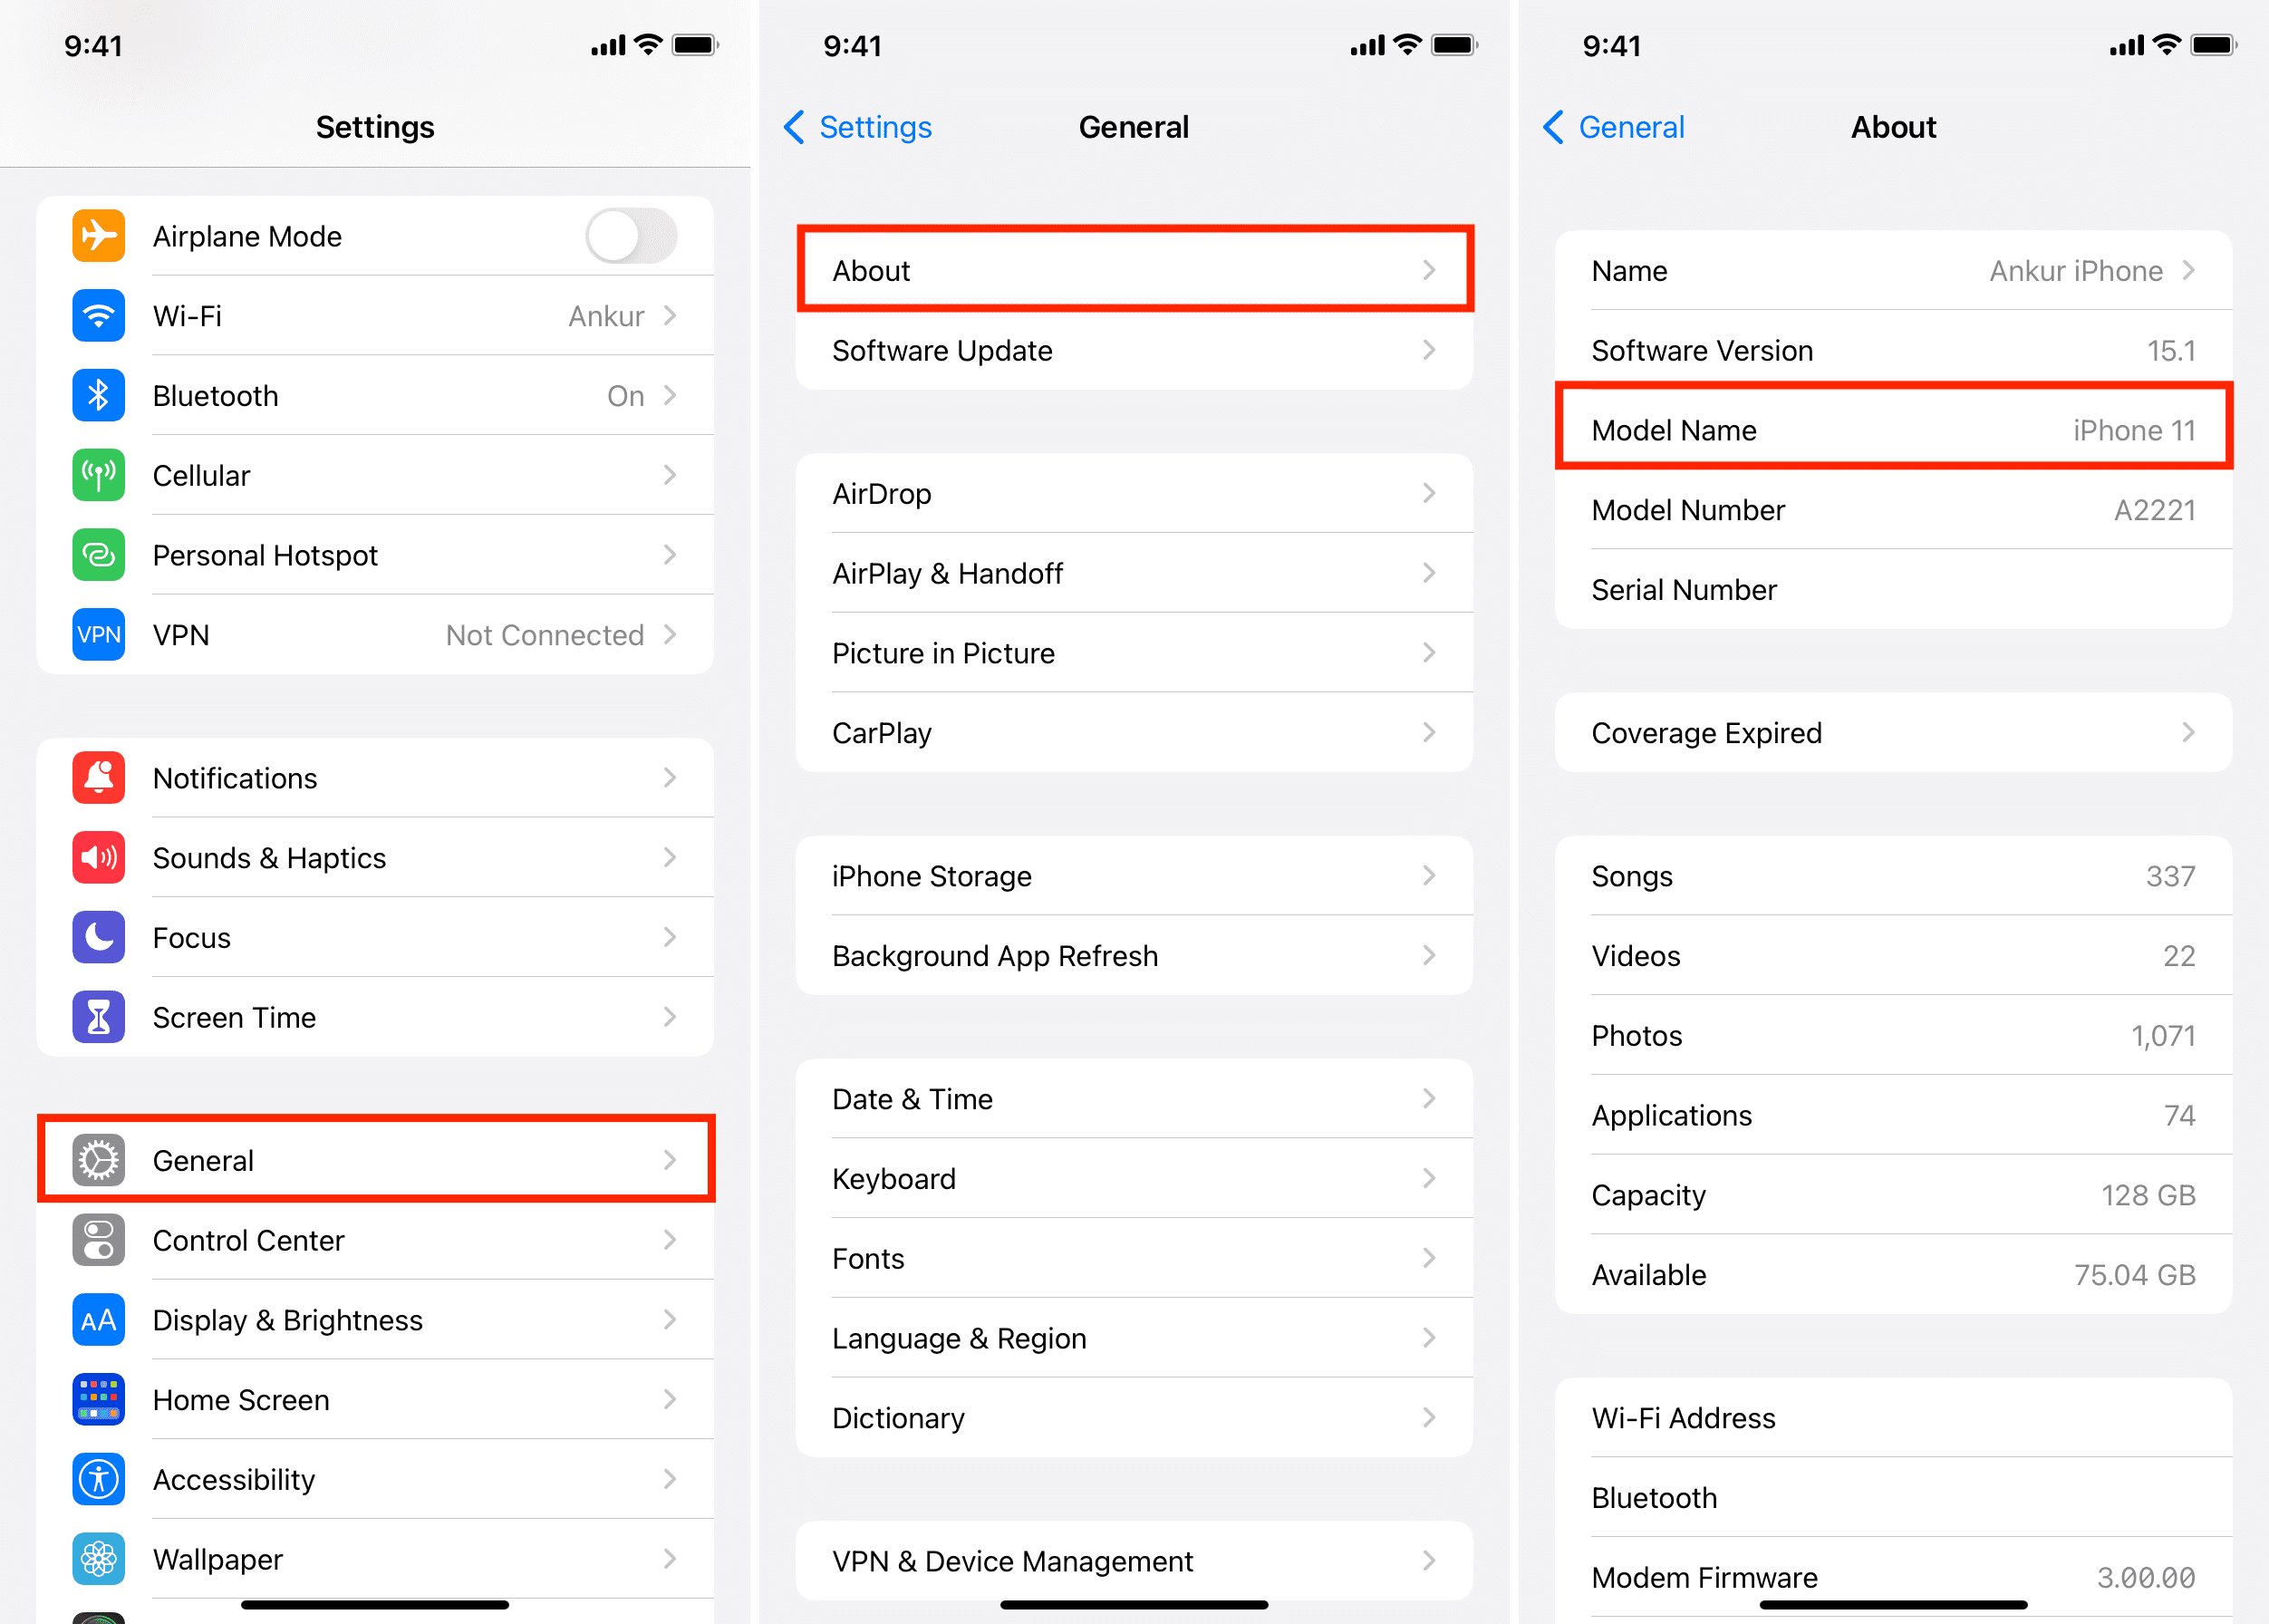 How to see iPhone Model Name